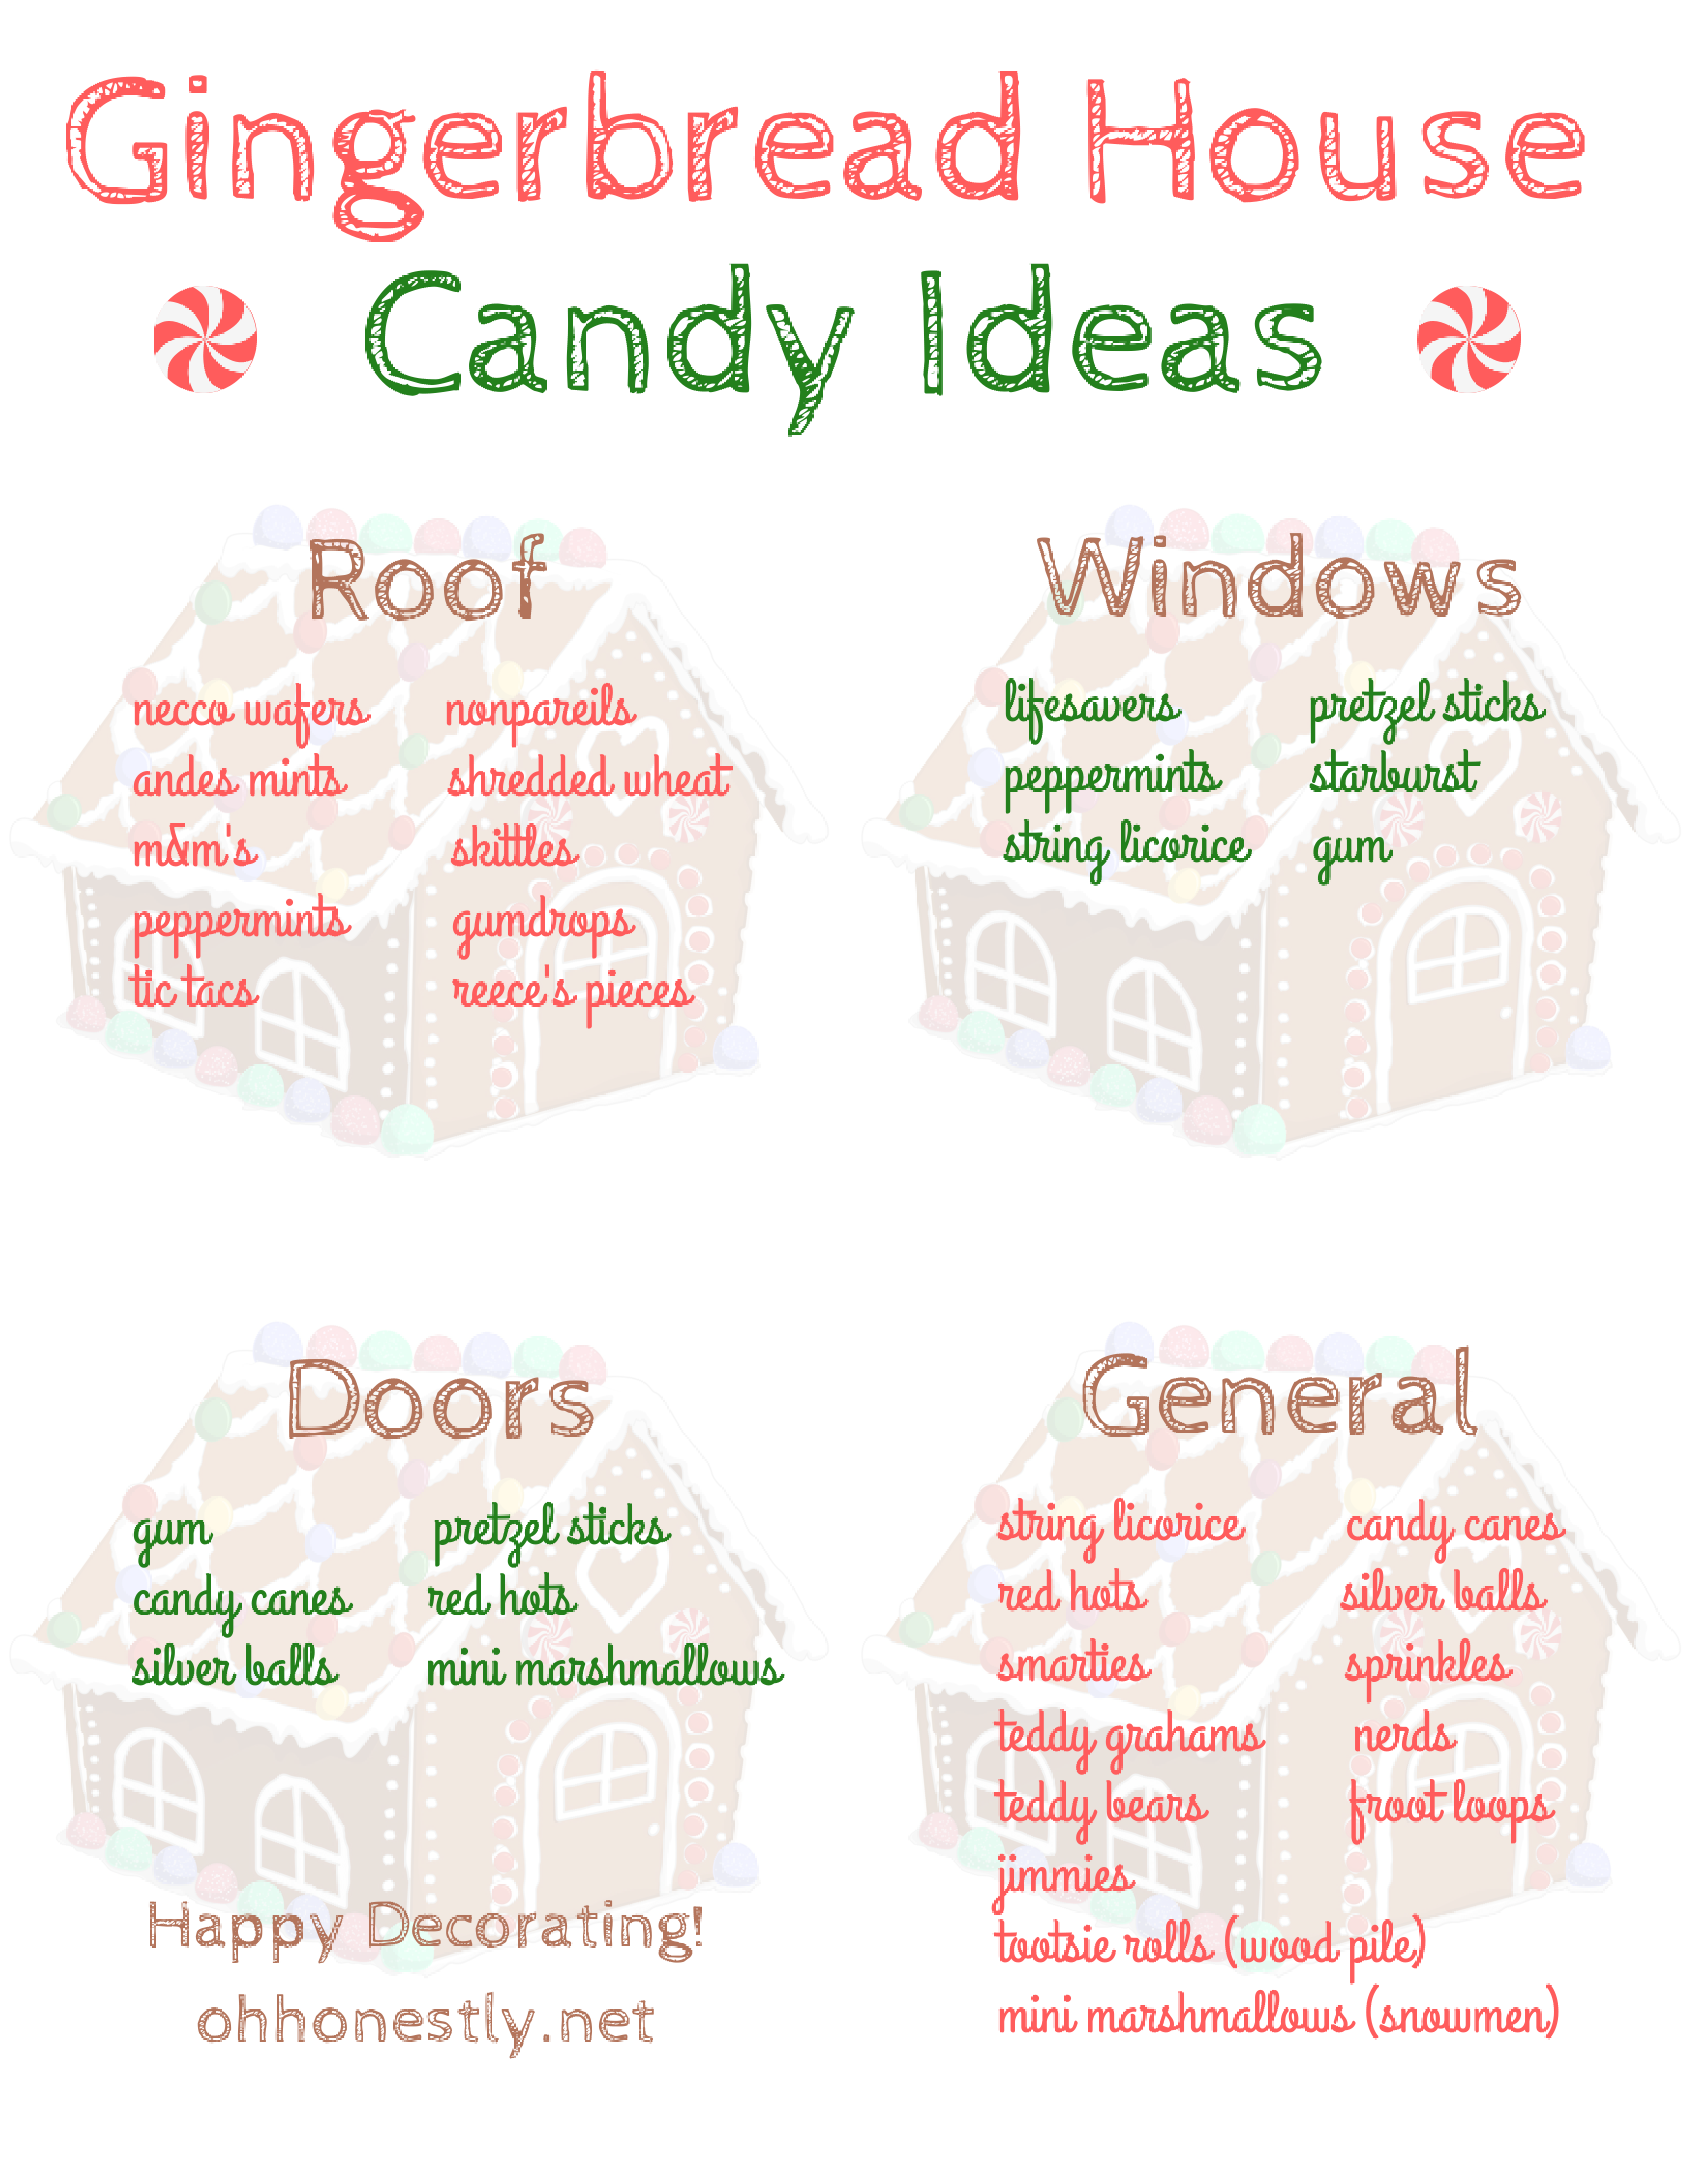 Planning to decorate a gingerbread house, but need some candy ideas? Grab this free printable with over 25 ideas for decorating the roof, door, windows, and more!